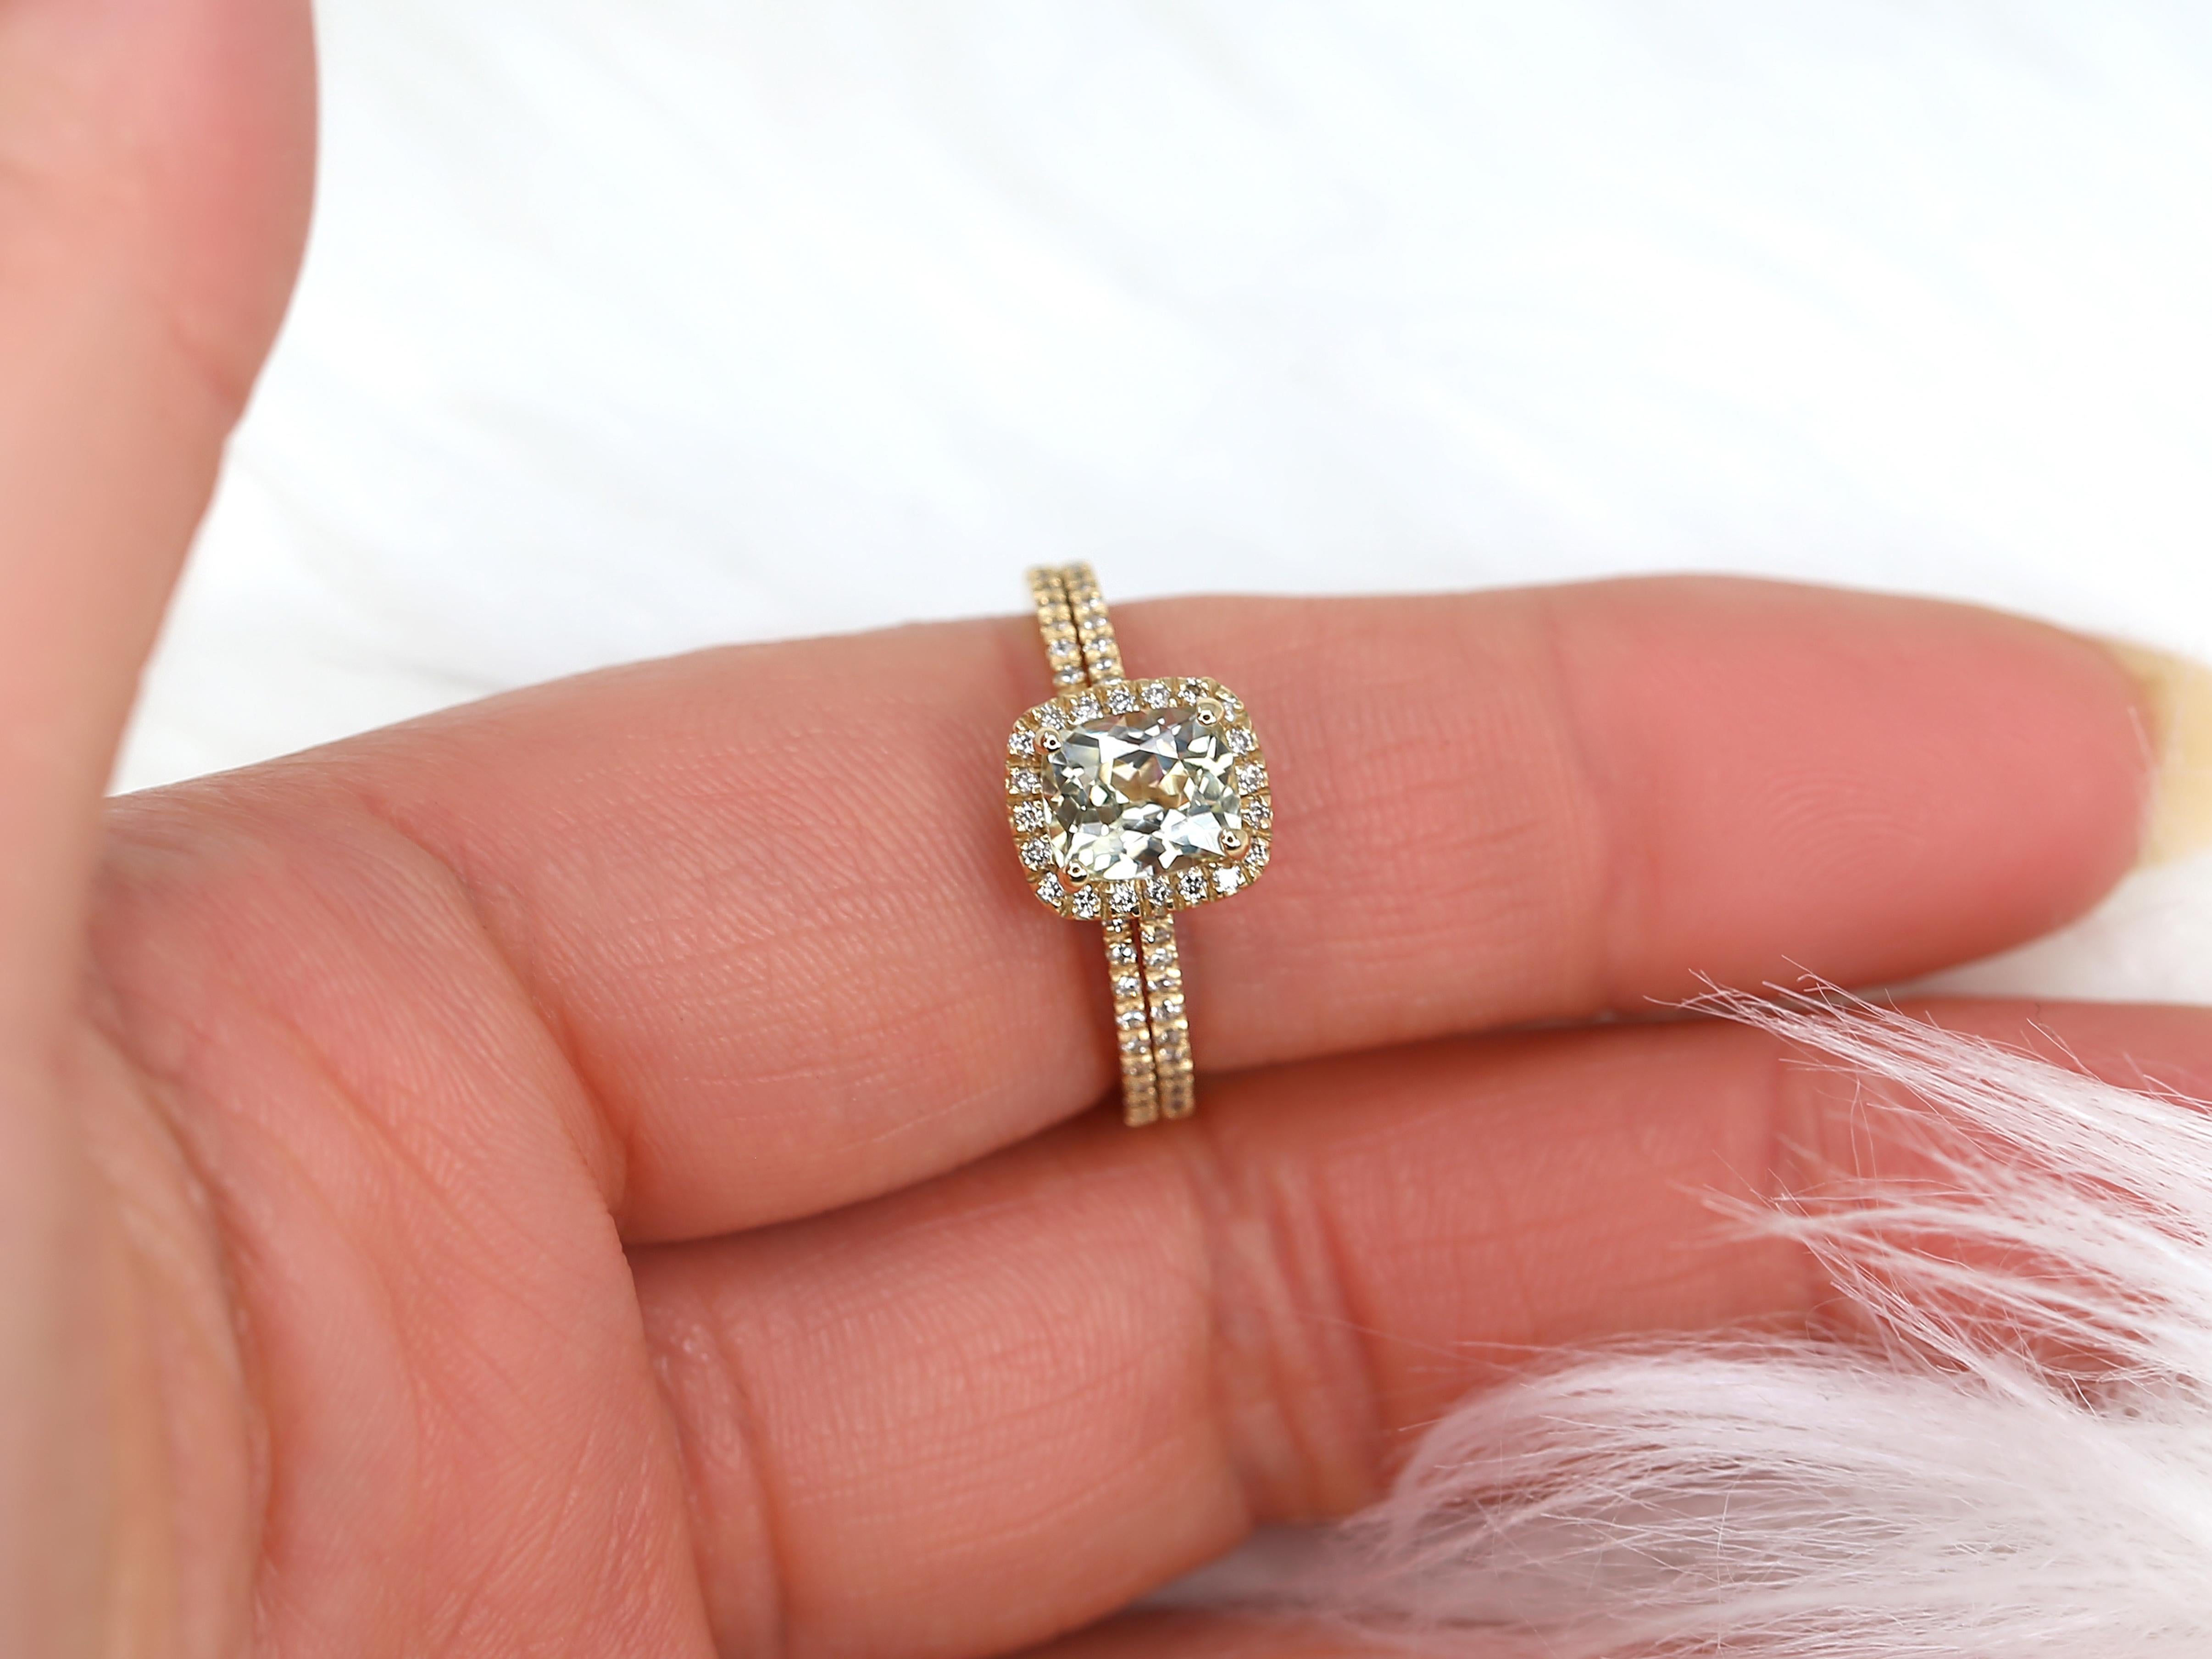 Dazzle your bride-to-be with this unique 1.56cts Romani bridal set. The dainty elongated cushion halo ring features a gorgeous champagne sapphire center stone surrounded by twinkling diamonds, paired perfectly with a matching diamond ring. Handmade